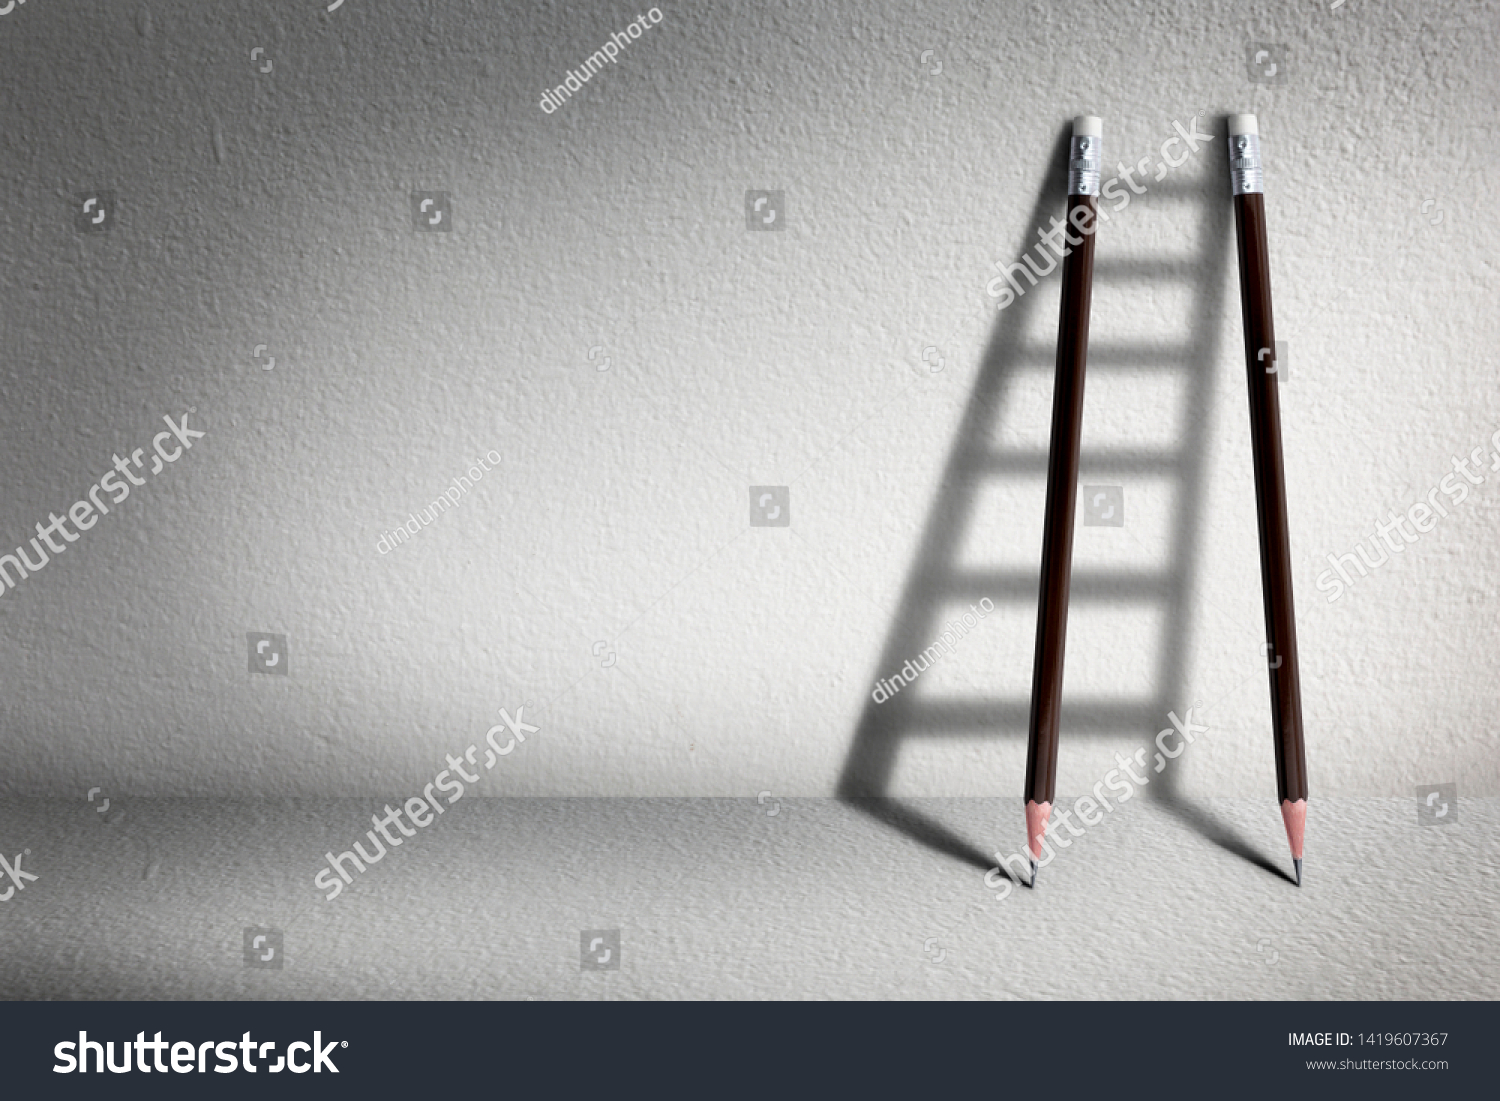 Stairs with pencil for effort and challenge in business to be achievement and successful concept.
 #1419607367